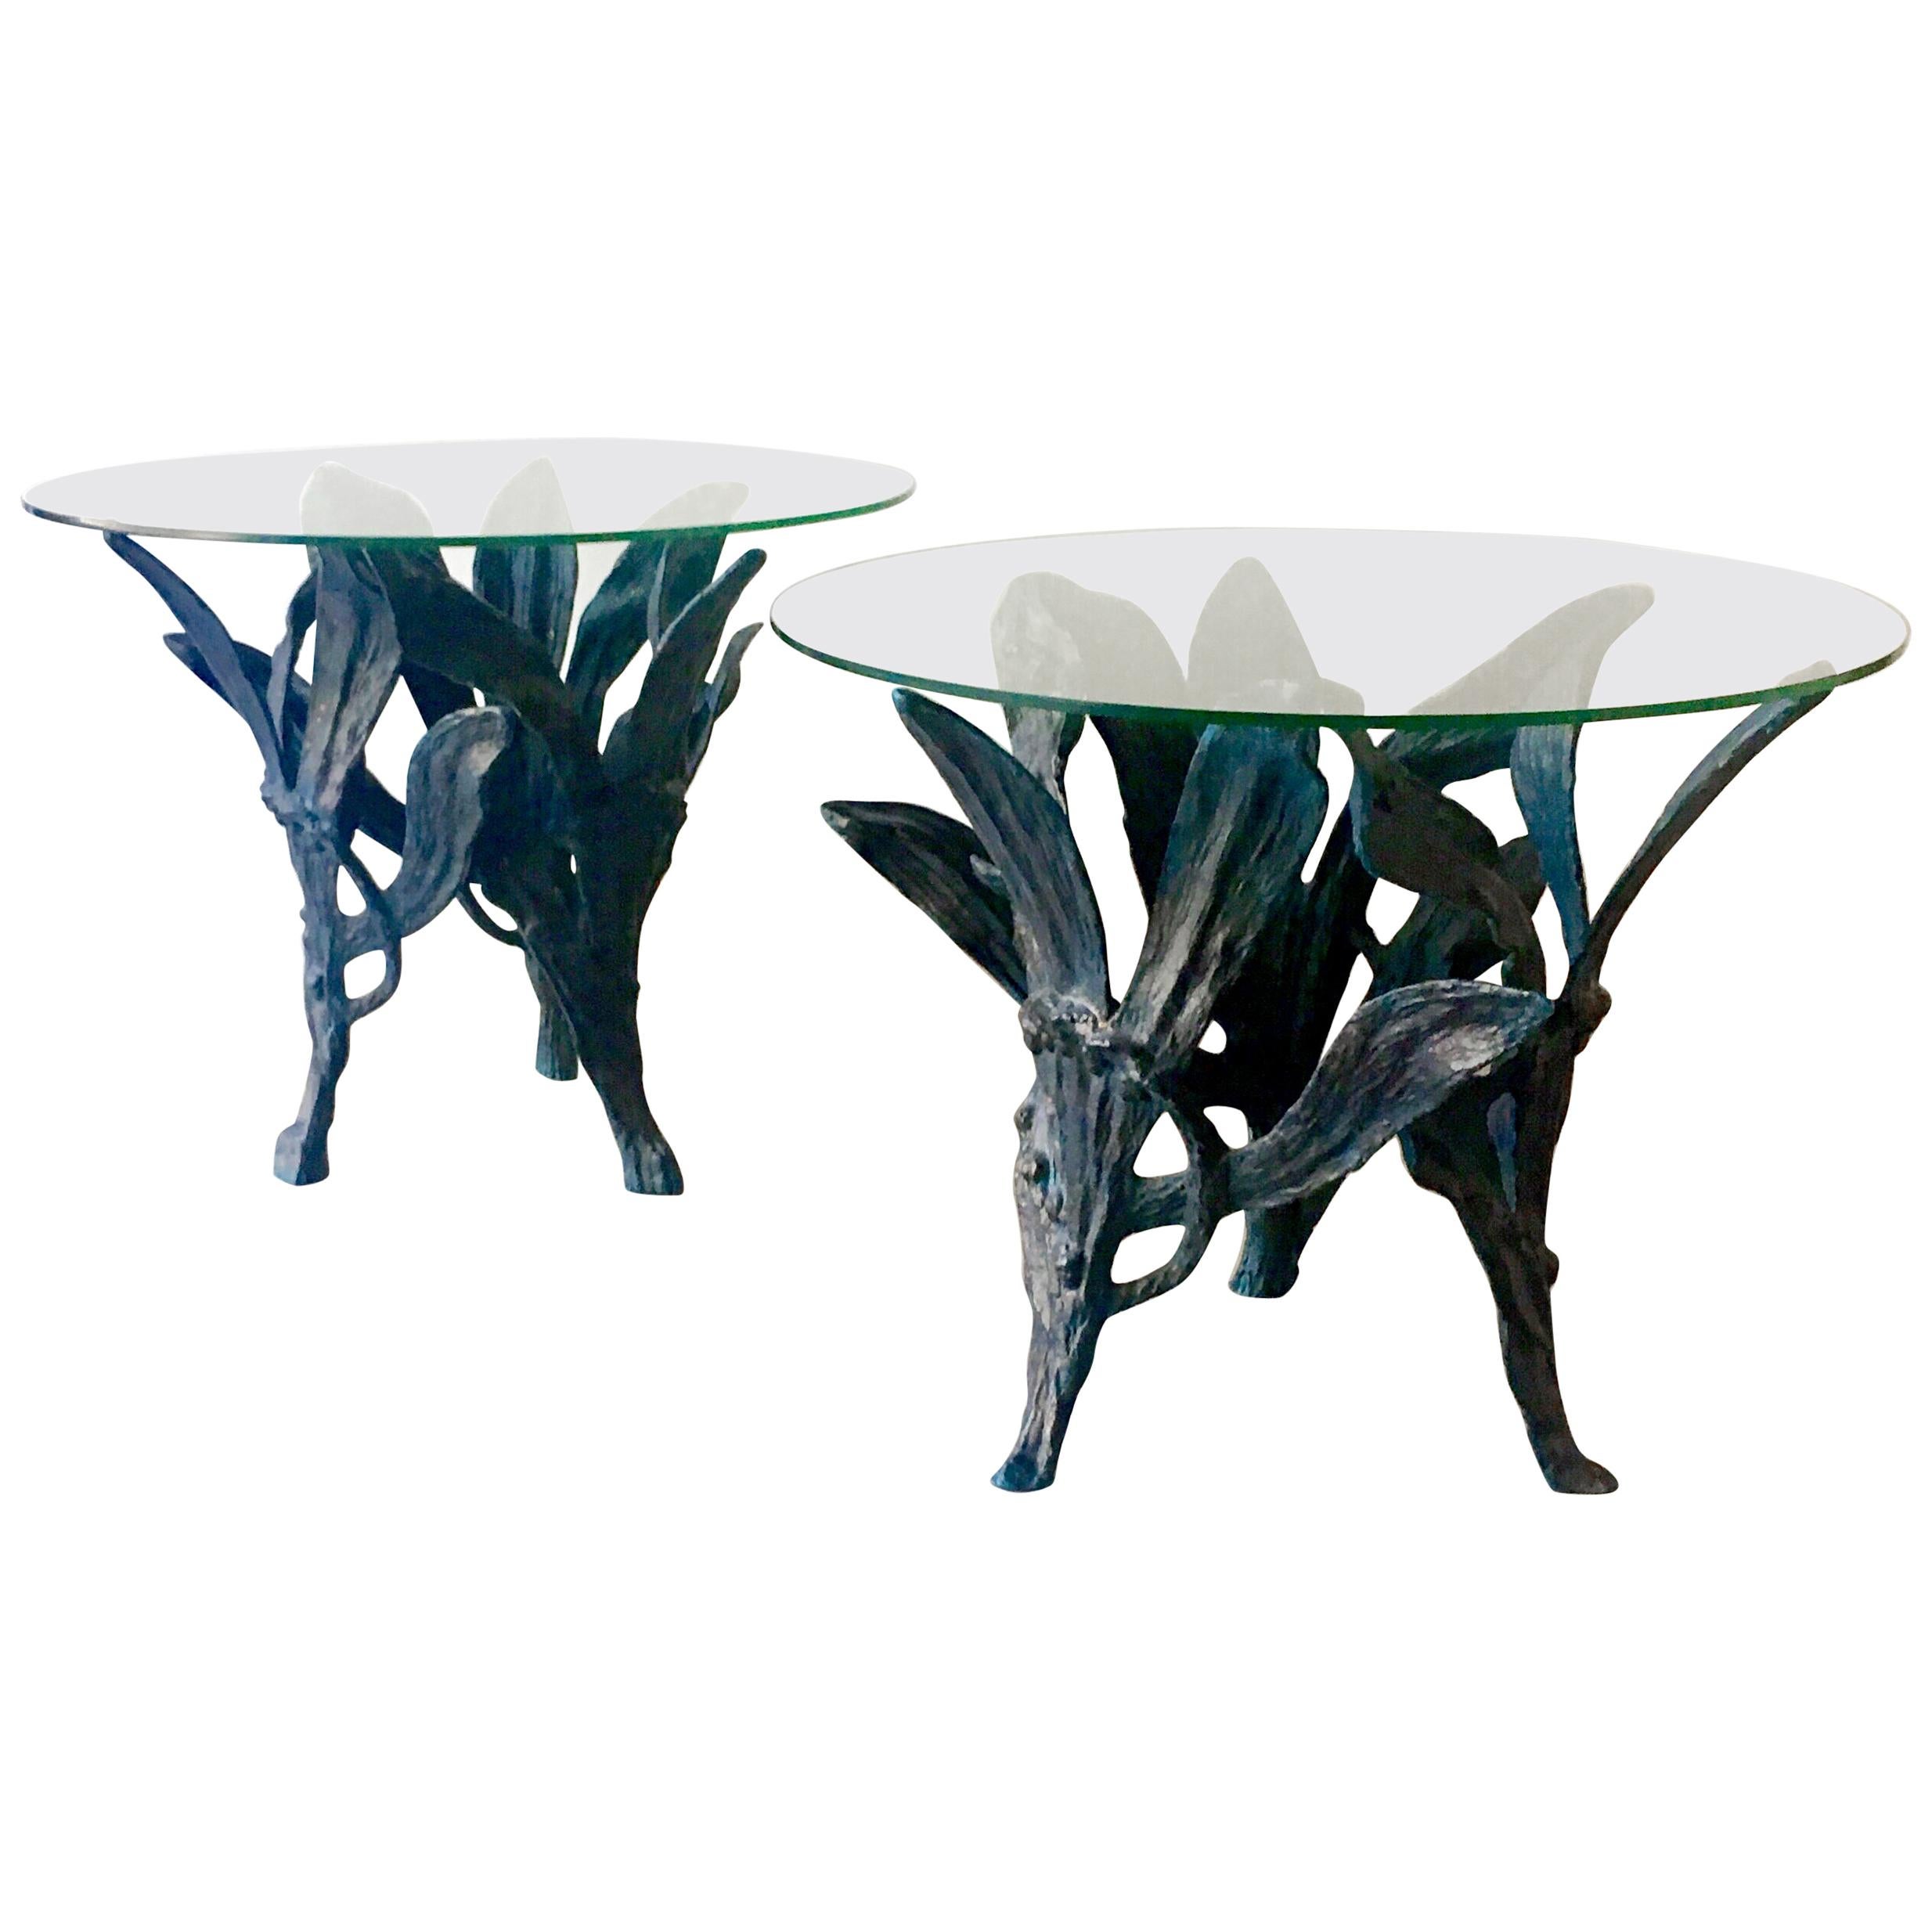 Large Pair of Patinated Aluminium Side Tables, 1960s For Sale